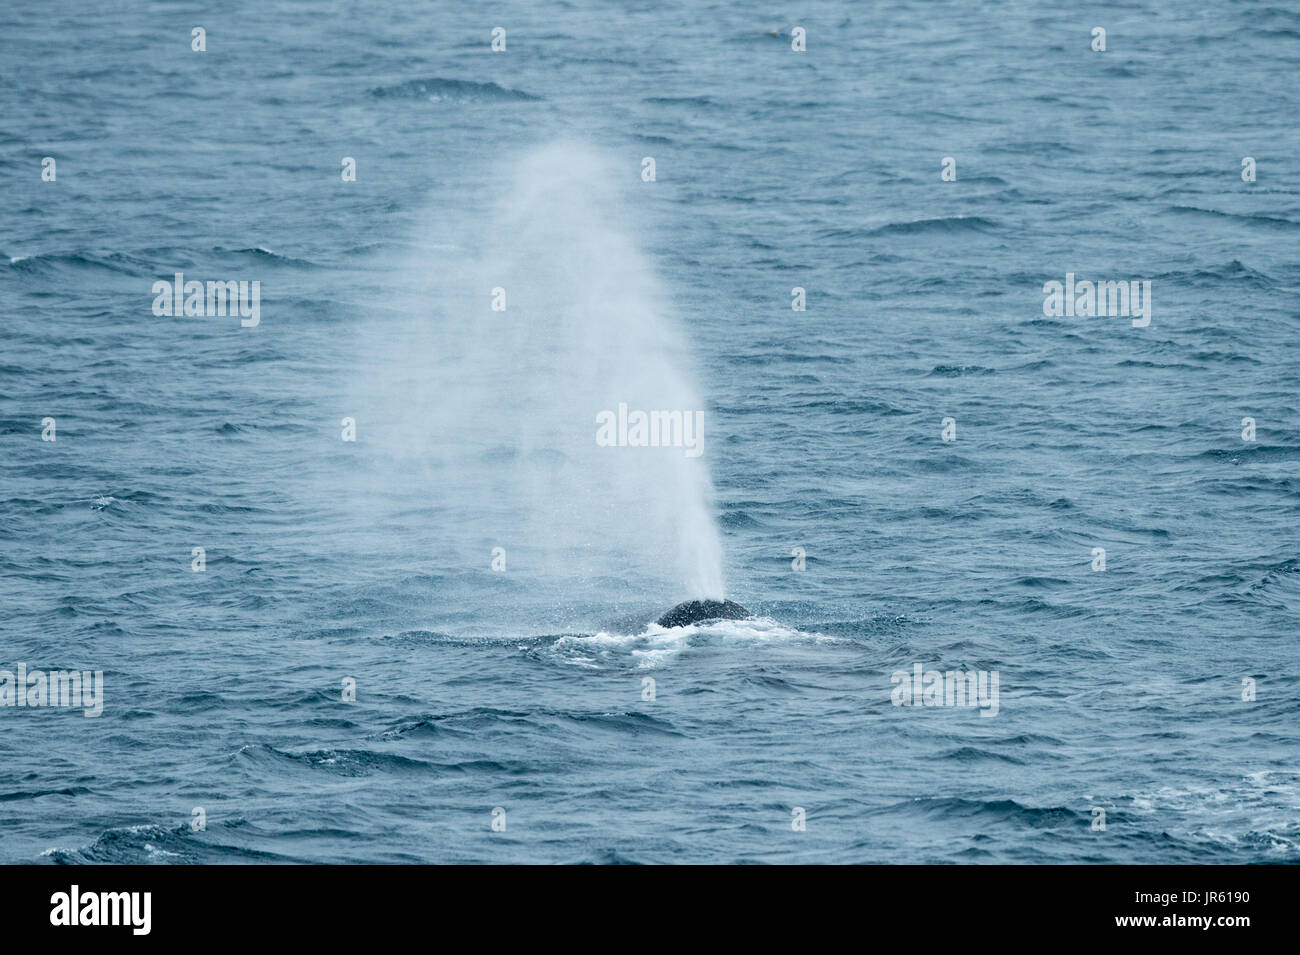 A Bowhead Whale breathing. Its blow can be 6-meter high. Arctic Ocean, Svalbard. Stock Photo